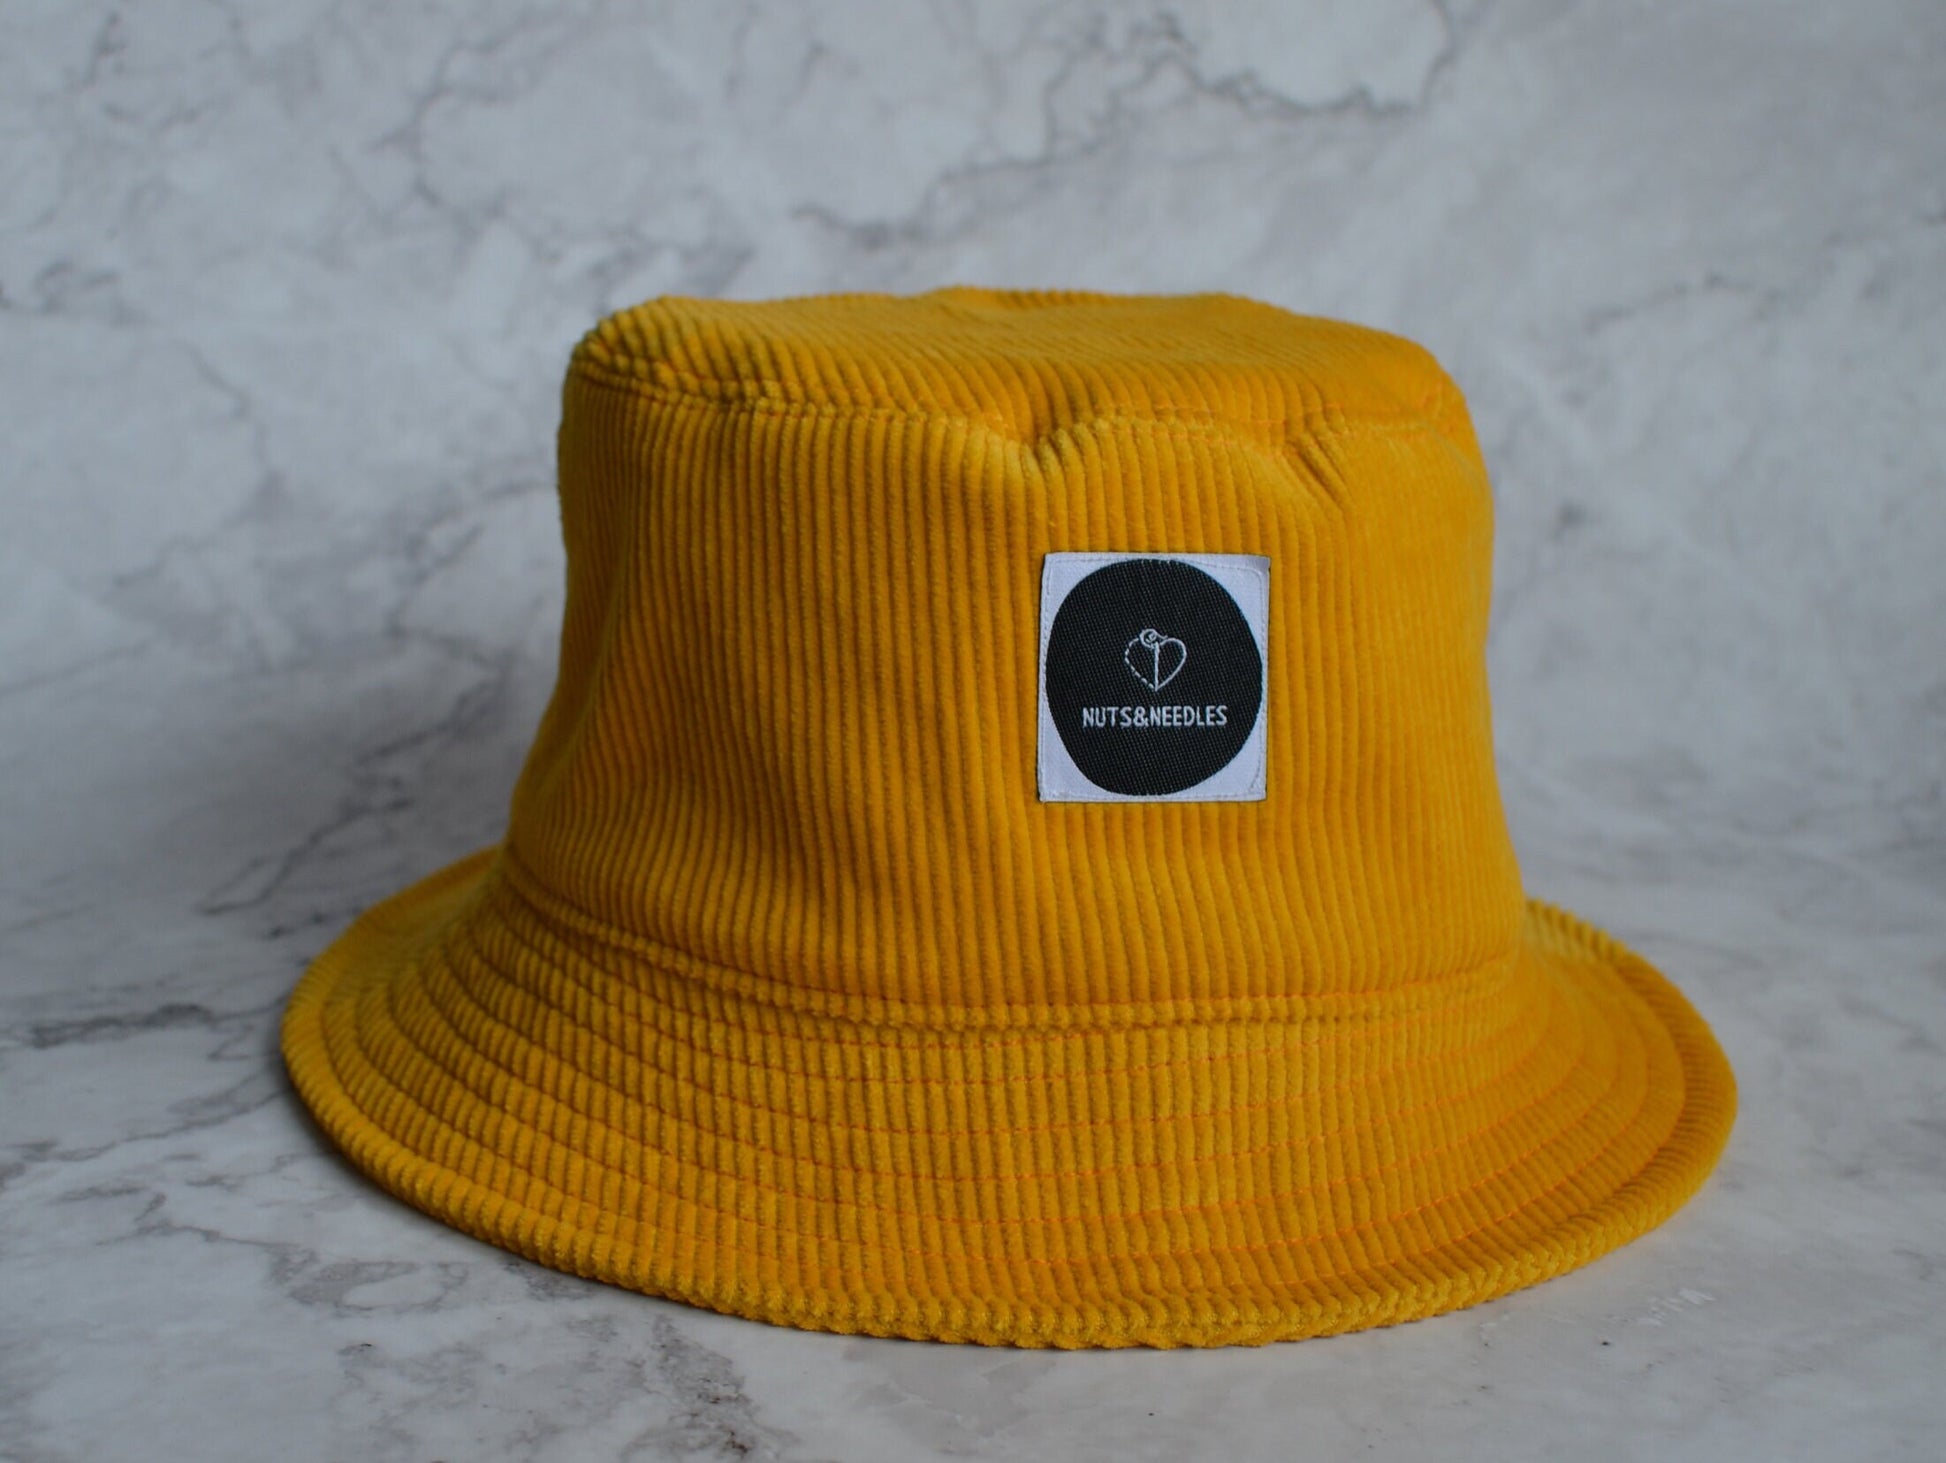 Bucket Hat 'Suicide Prevention + Awareness', Mental Health, part of profit donated to Charity, handmade, self care, unisex urban style, DBT